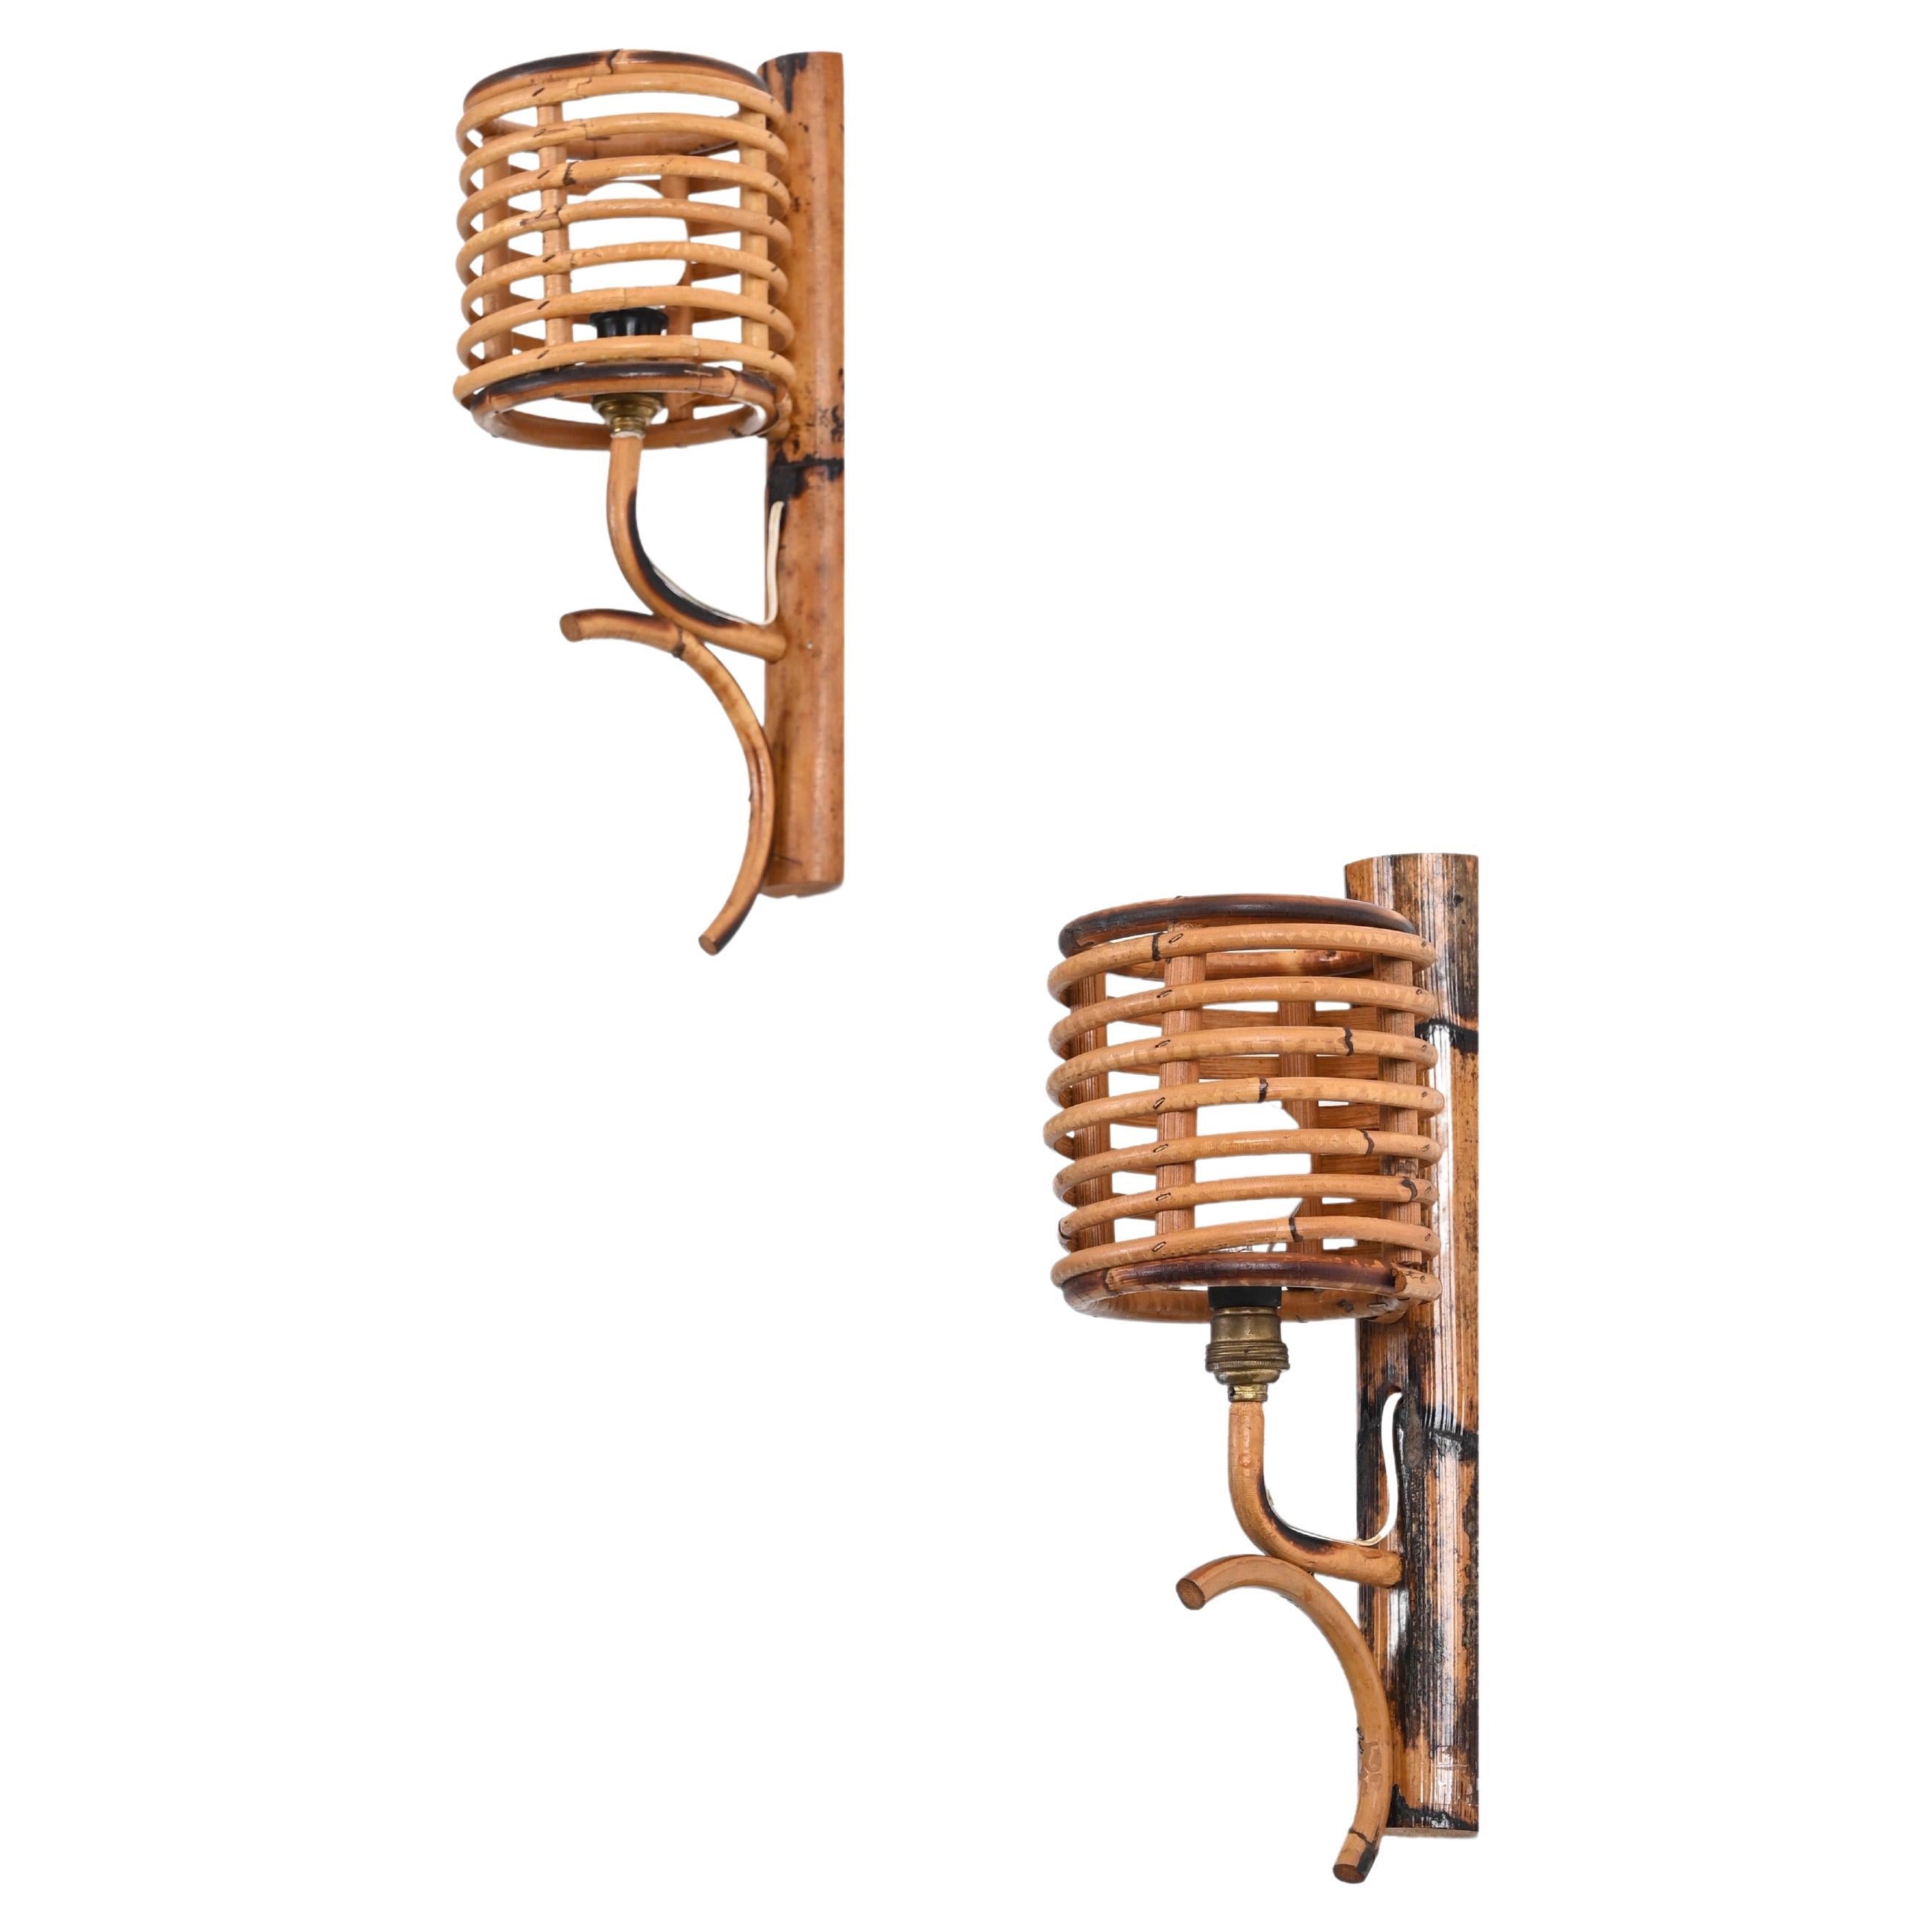 Lovely pair of midcentury wall lamps in rattan and bamboo. These fantastic lamps were produced in the 1960s in France and are attributed to Louis Sognot. 

The sconces feature a beautiful spiral-shaped shade in curved rattan. A great example of